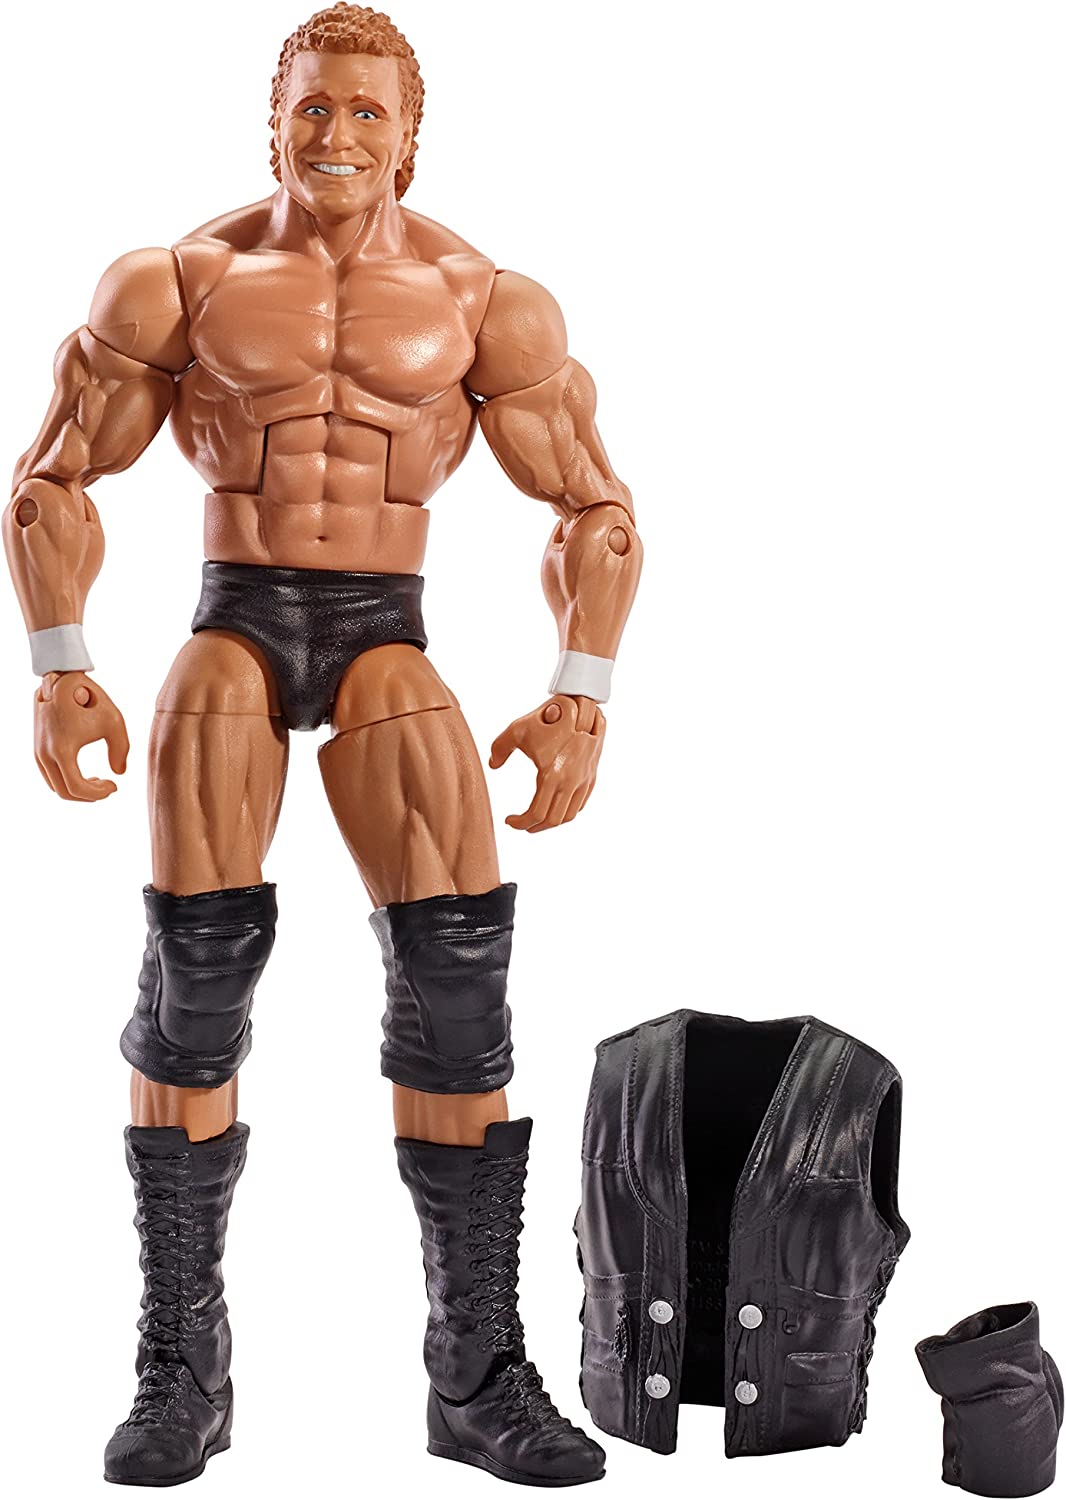 2015 WWE Mattel Elite Collection Series 39 Sycho Sid